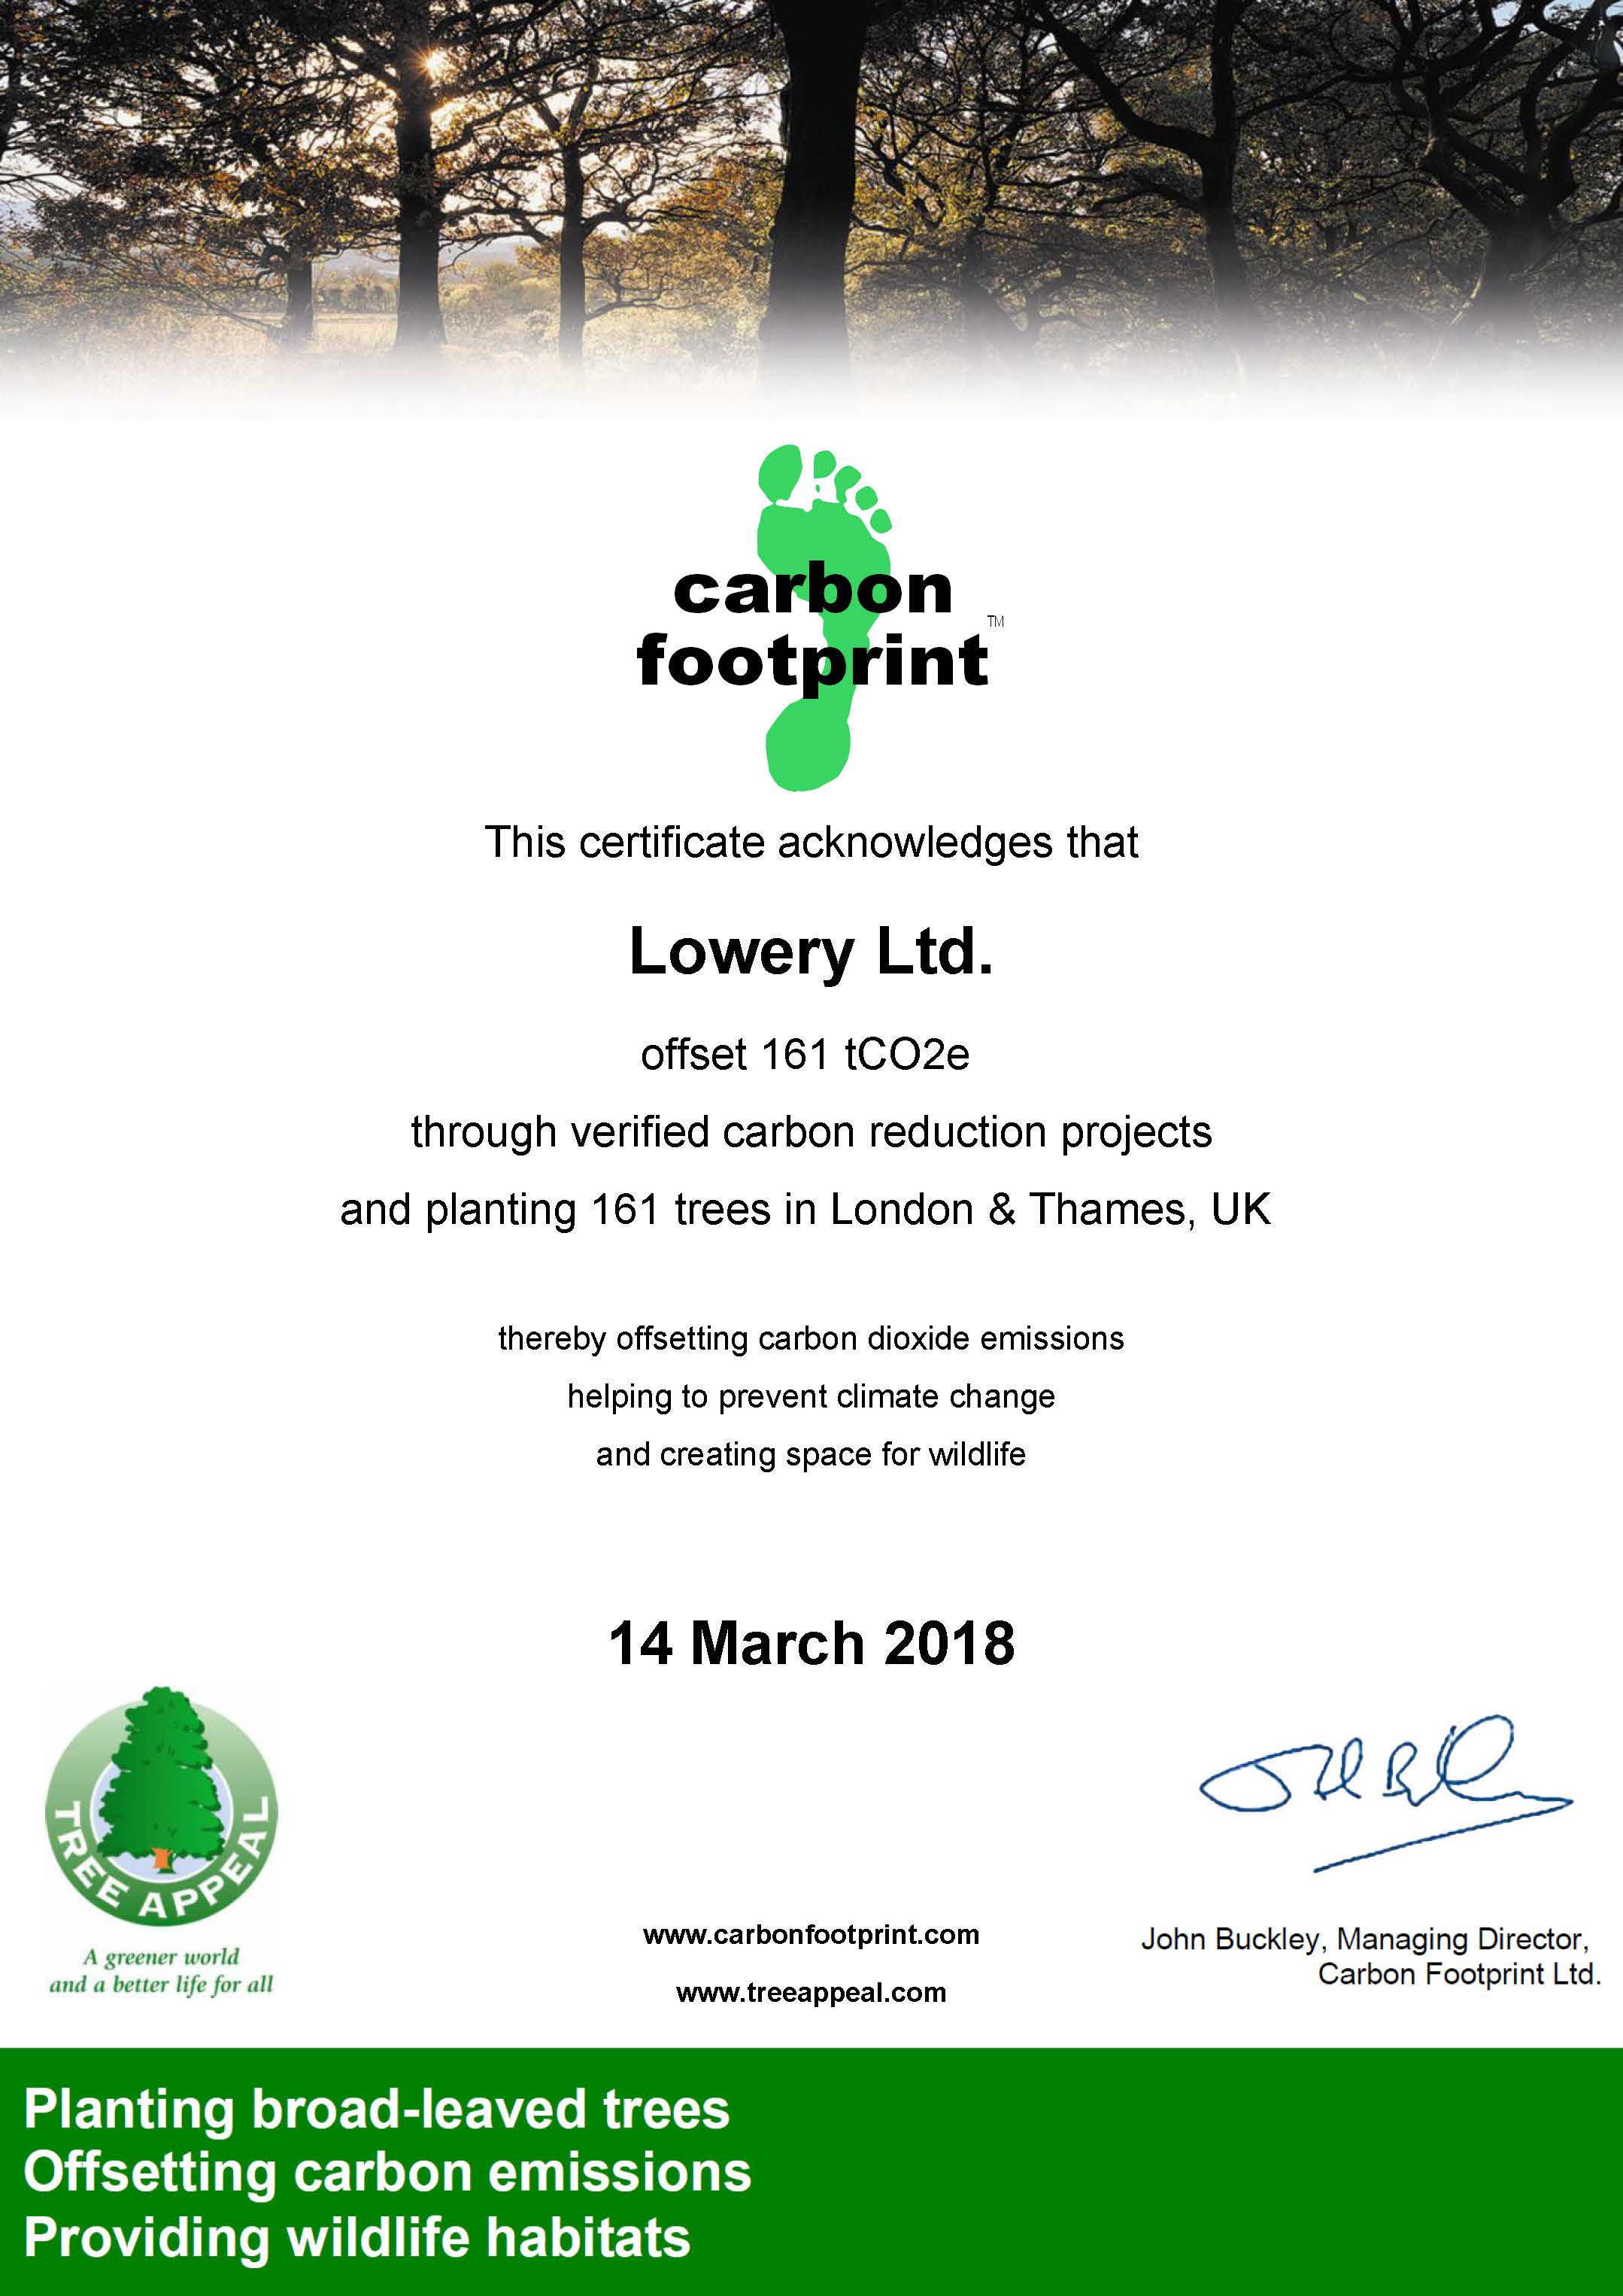 Carbon Footprint offset through Tree Planting in London / Thames Valley